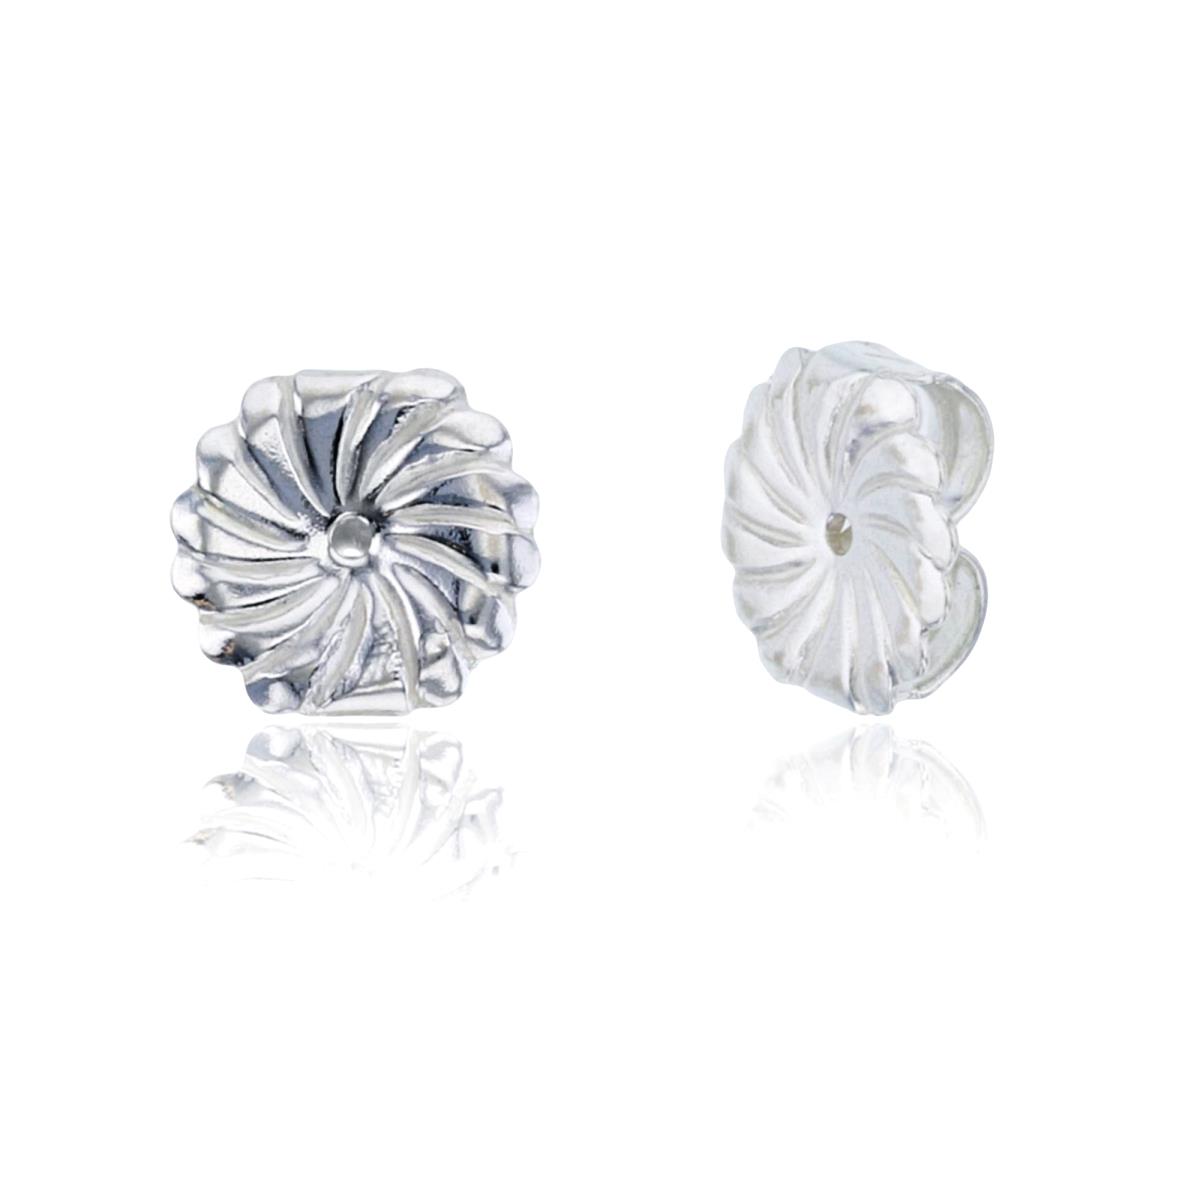 Sterling Silver Plated 9mm Twist Textured Earring Back Finding (1pc)